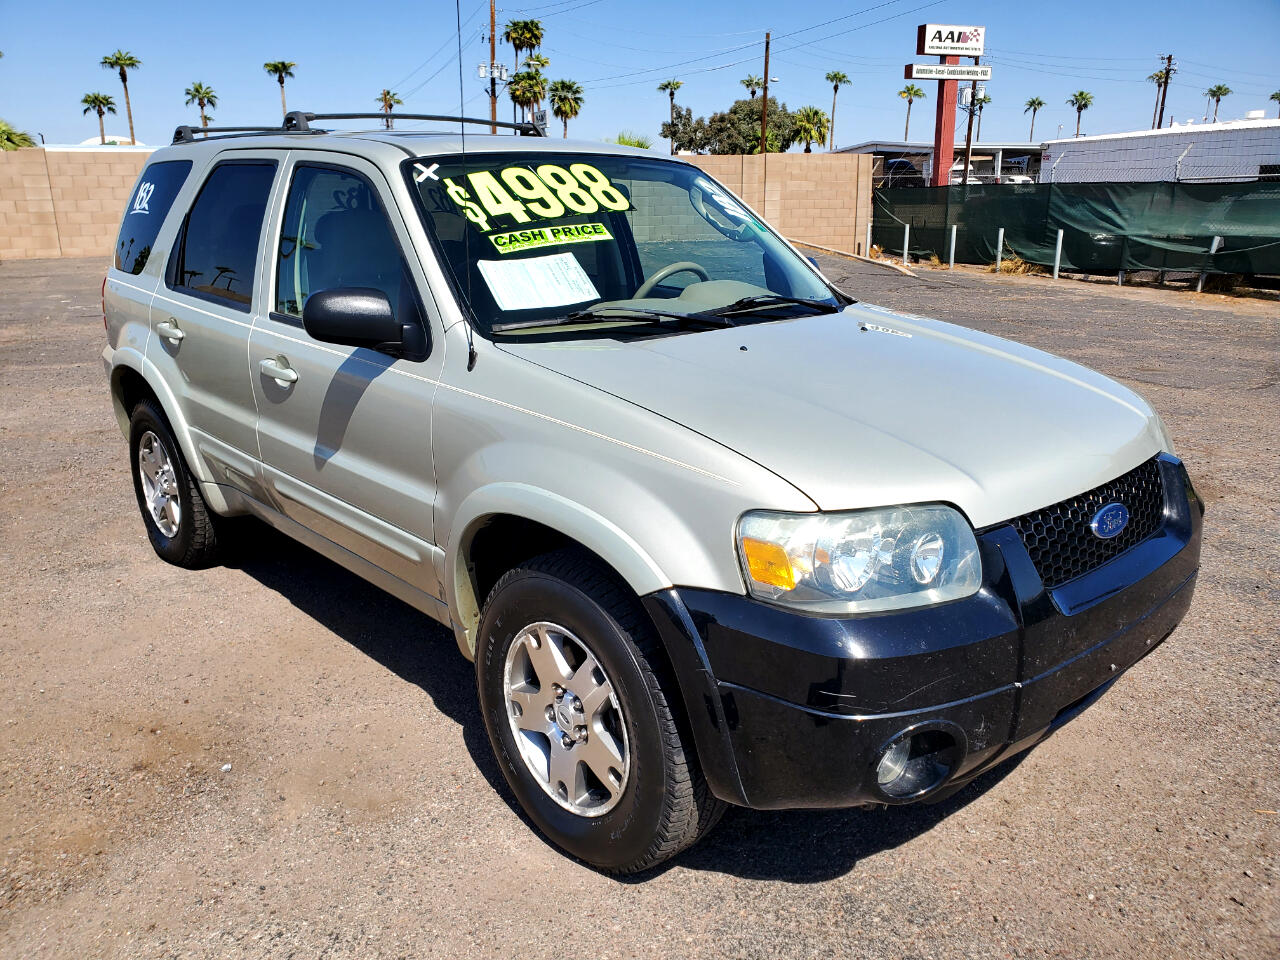 Used 2005 FORD ESCAPE 30 4WD SUNROOF for Sale BK184895  BE FORWARD